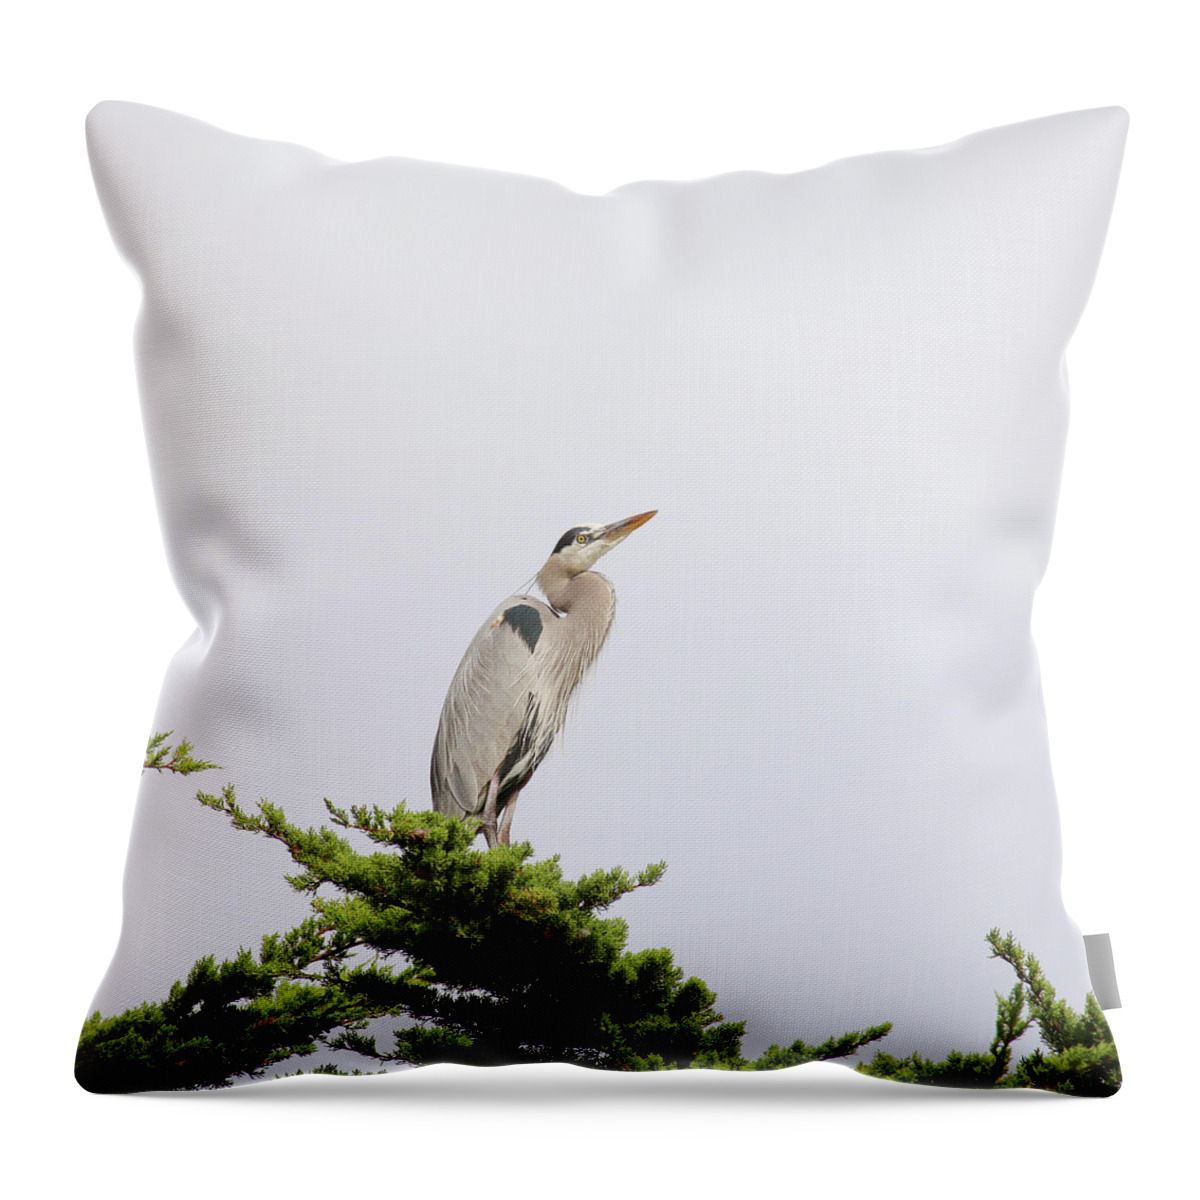 Great Blue Heron Throw Pillow featuring the photograph Great Blue Heron by Art Block Collections